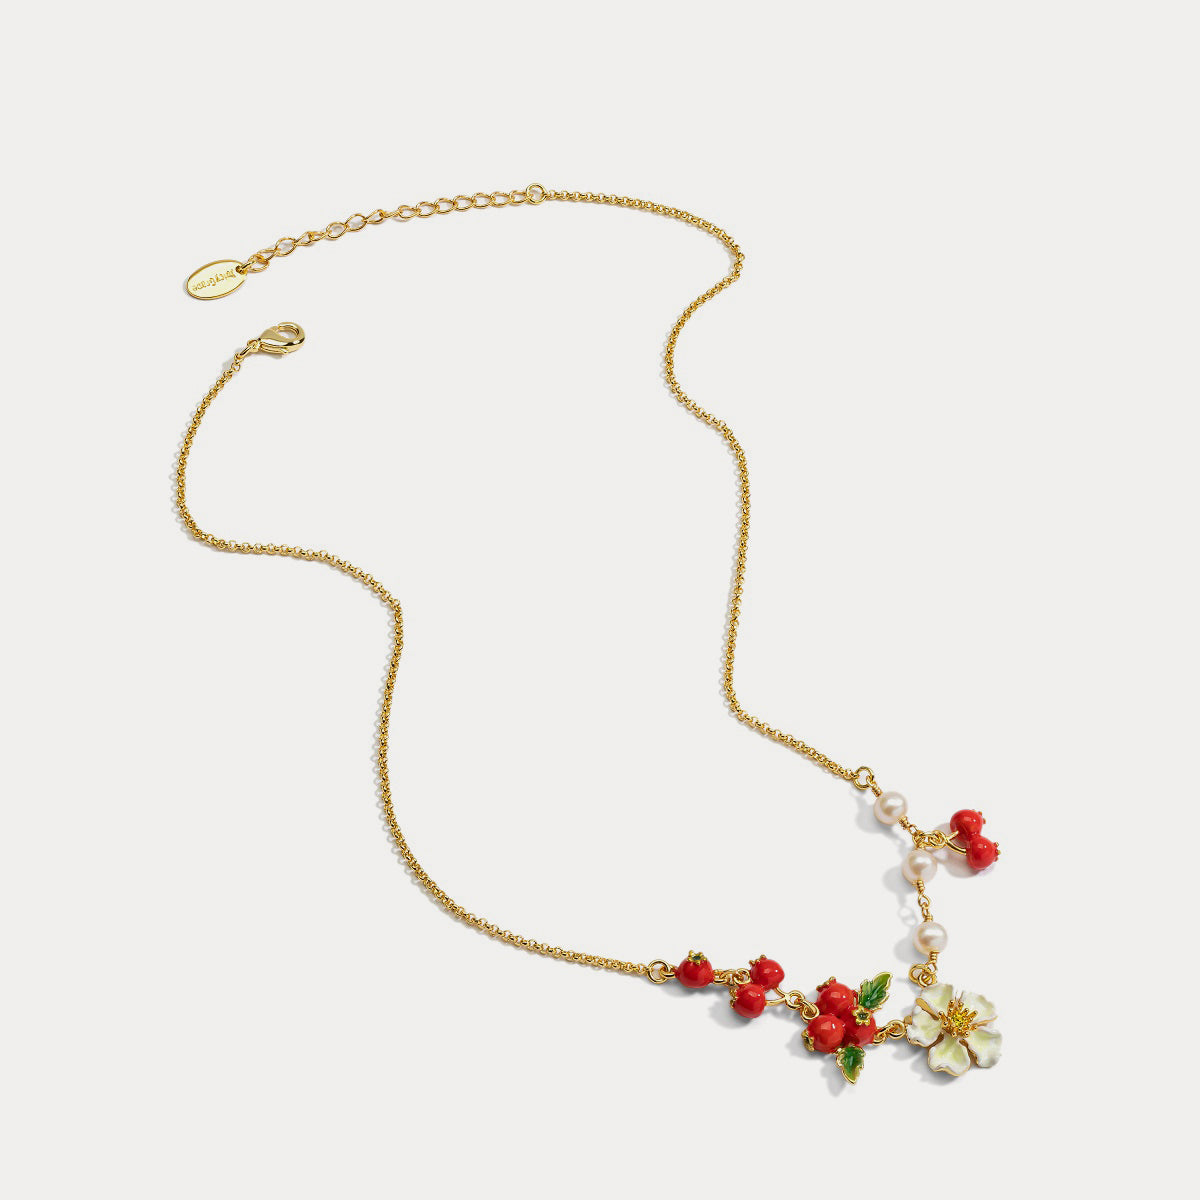 Cranberry Flowers Necklace Autumn Jewelry